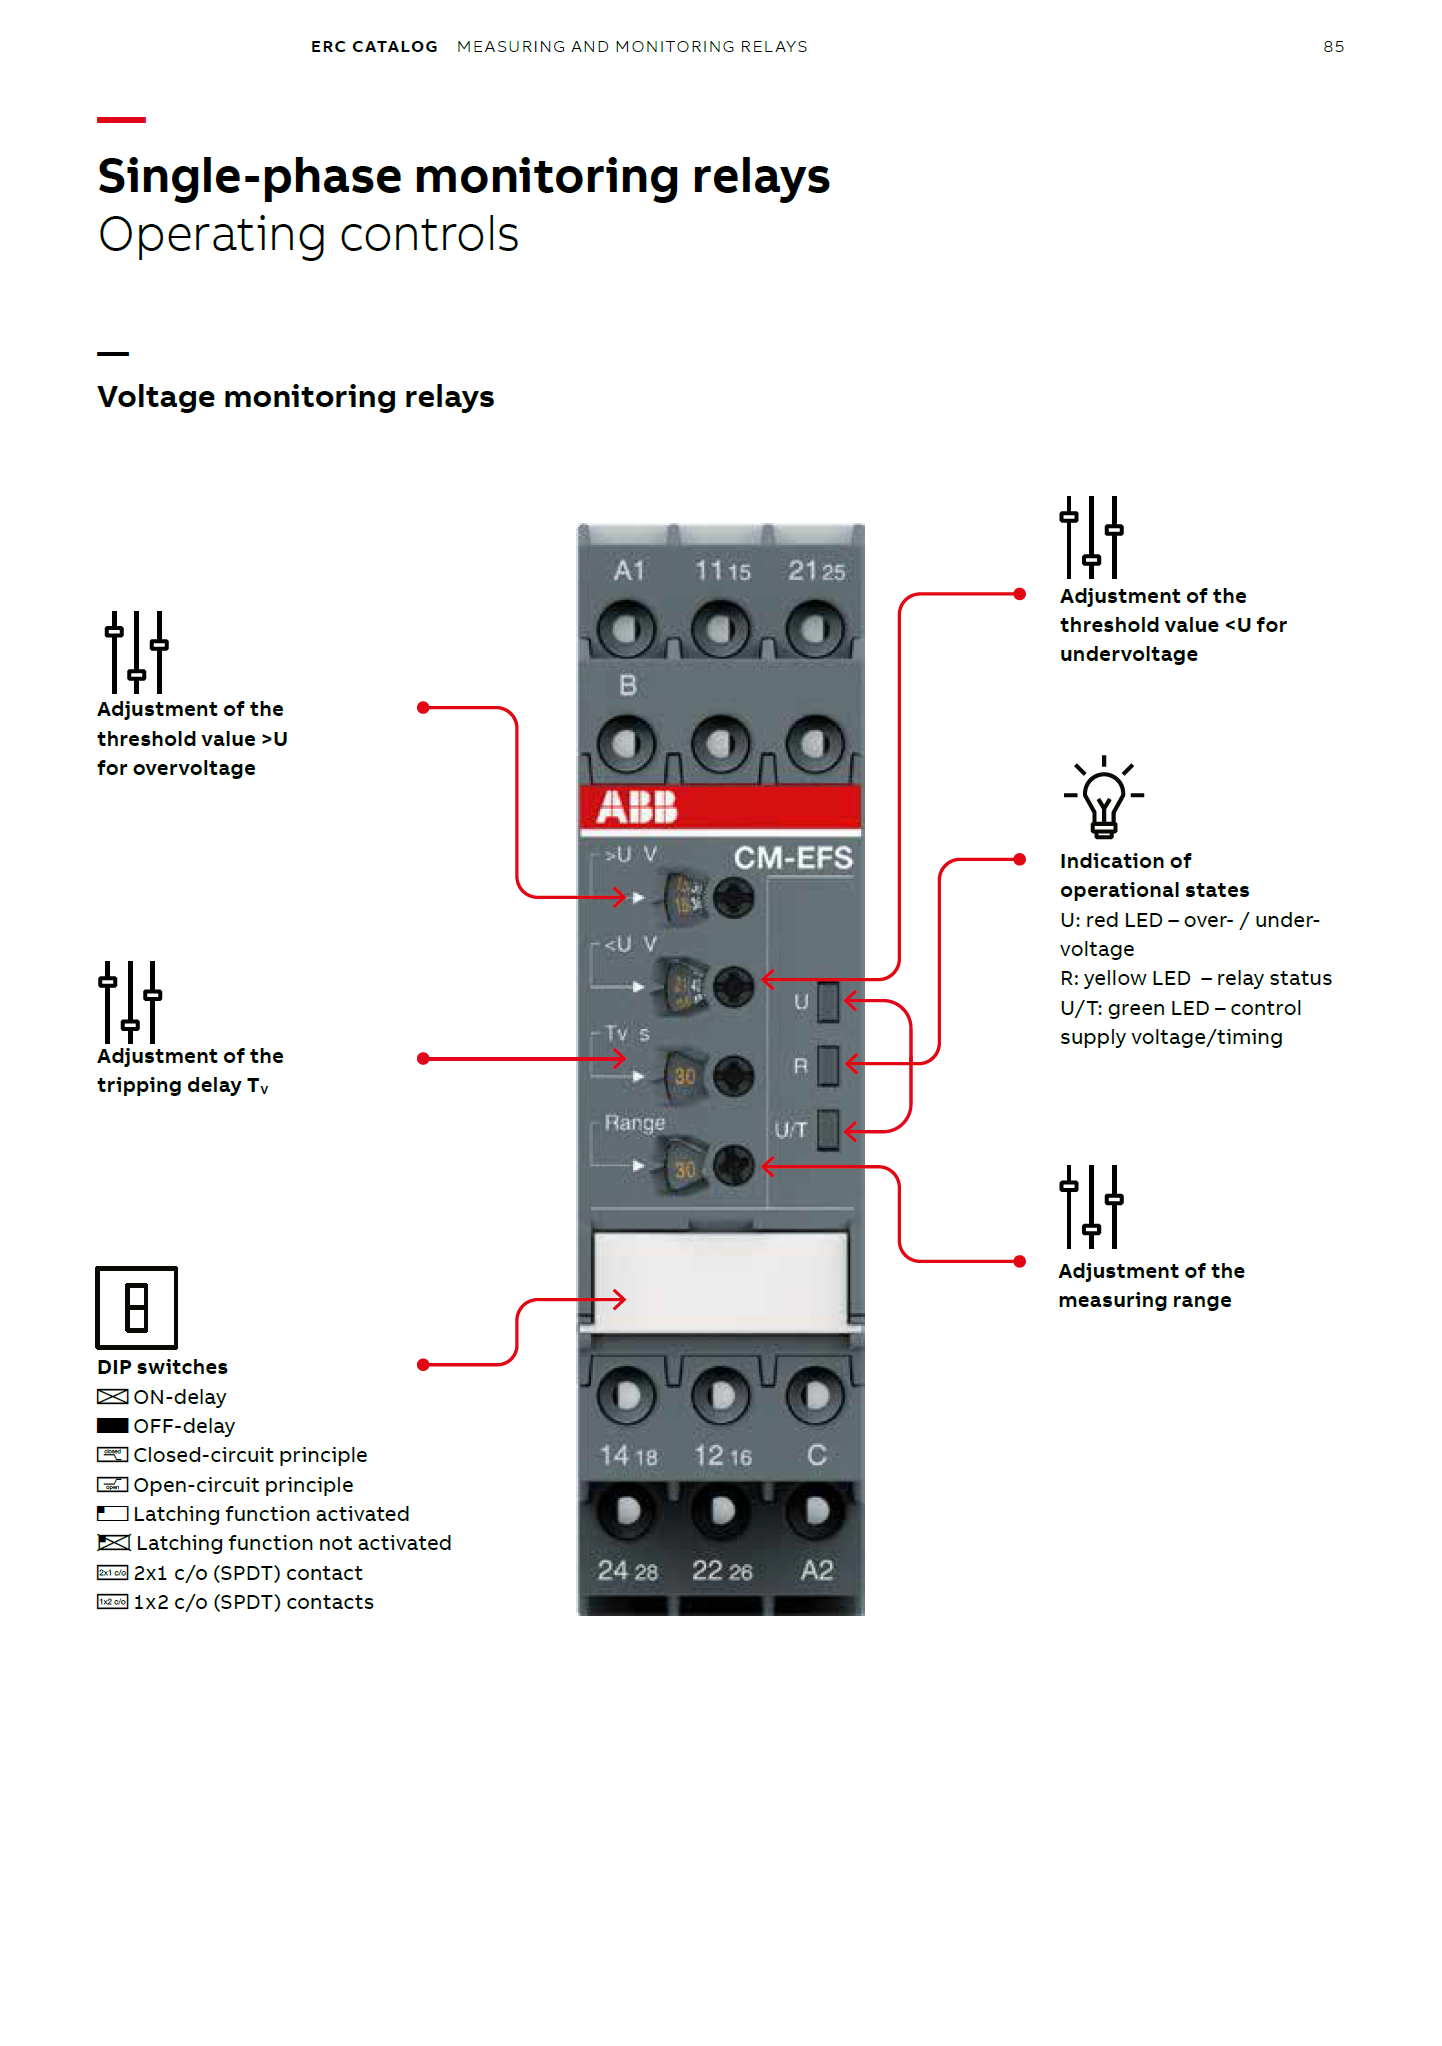 ABB multifunctional three-phase monitoring relays CM-MPS.43S / CM-MPS.43P